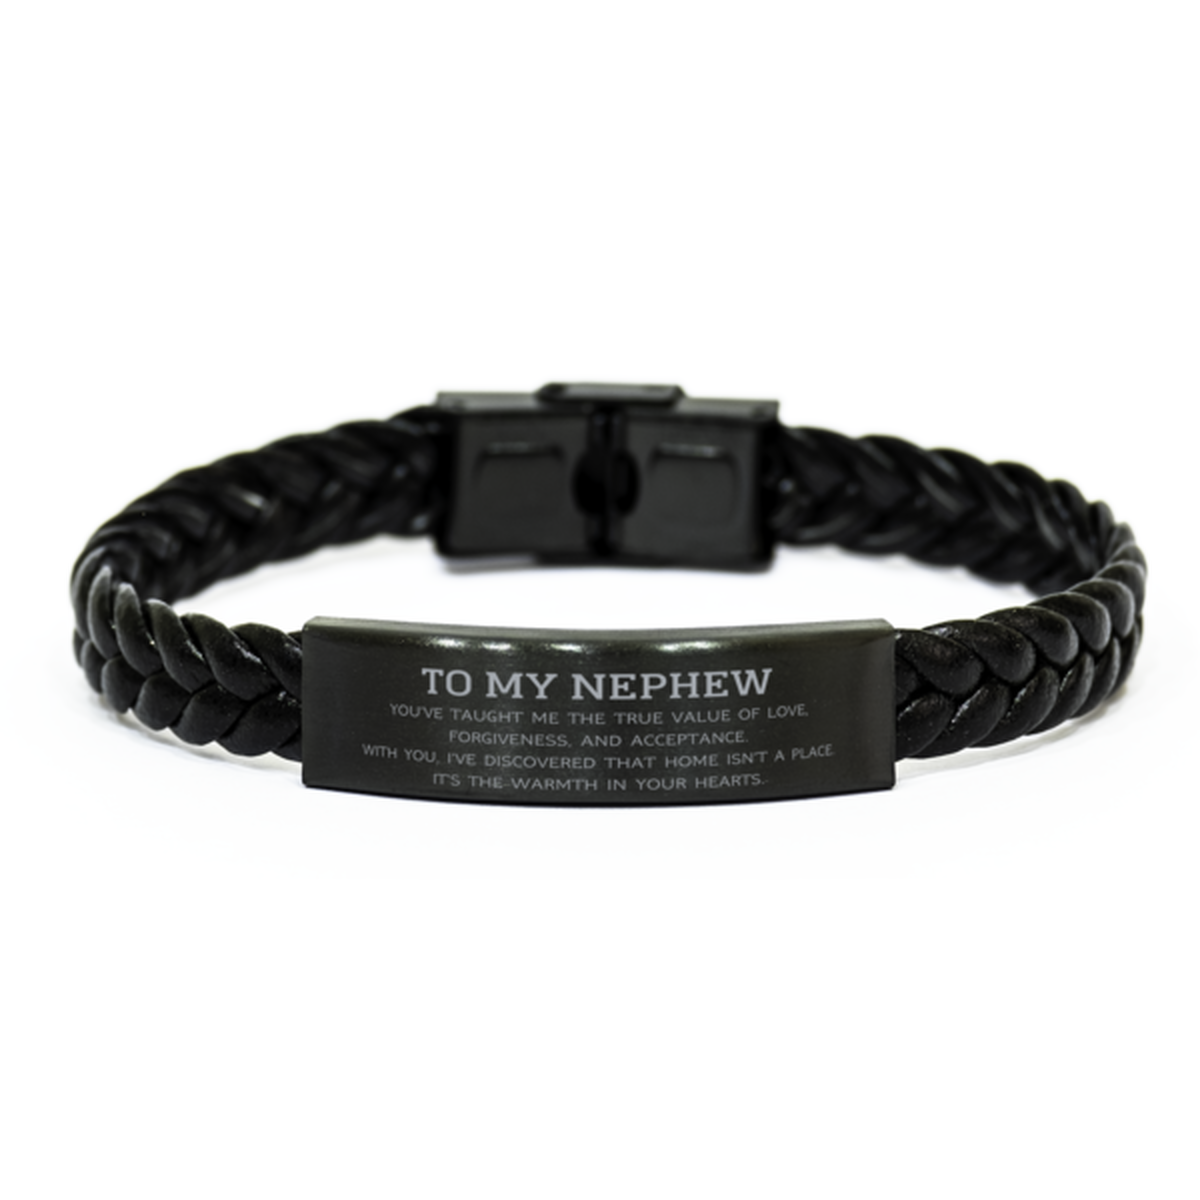 To My Nephew Gifts, You've taught me the true value of love, Thank You Gifts For Nephew, Birthday Braided Leather Bracelet For Nephew